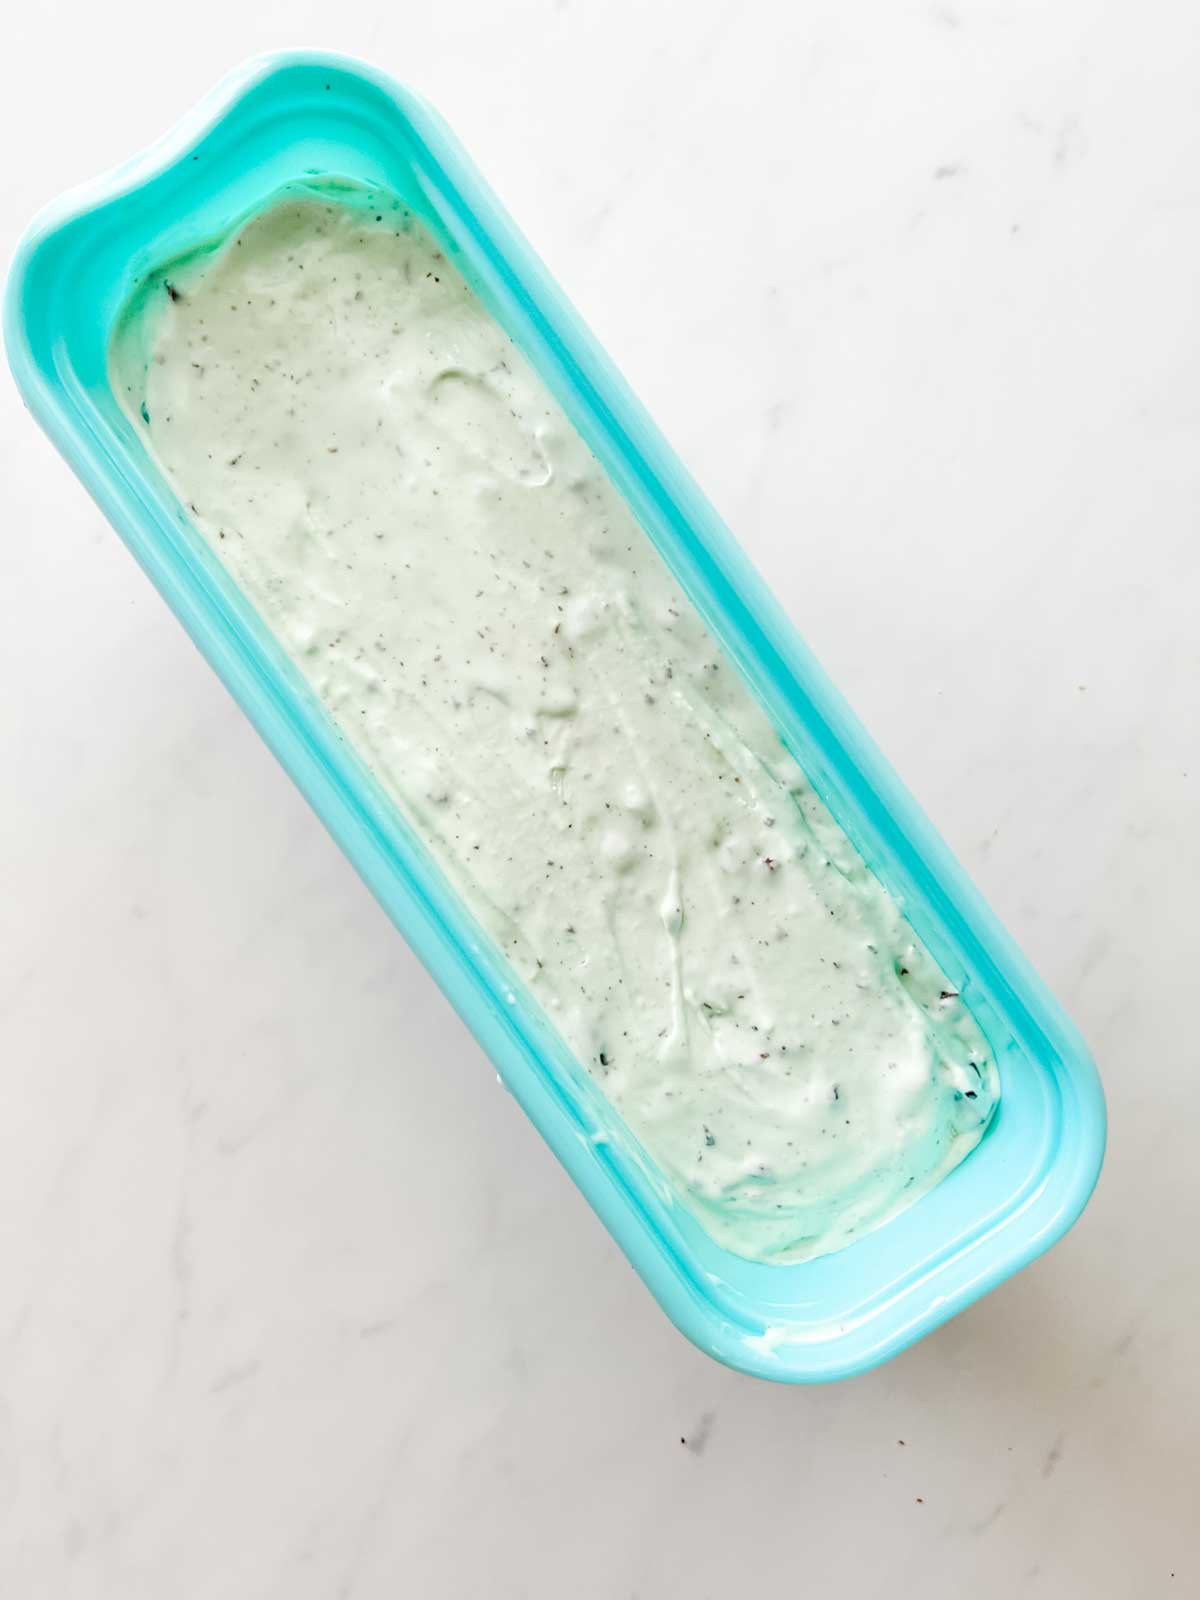 Soft keto mint chocolate chip ice cream that has been transferred to a freezer safe container.